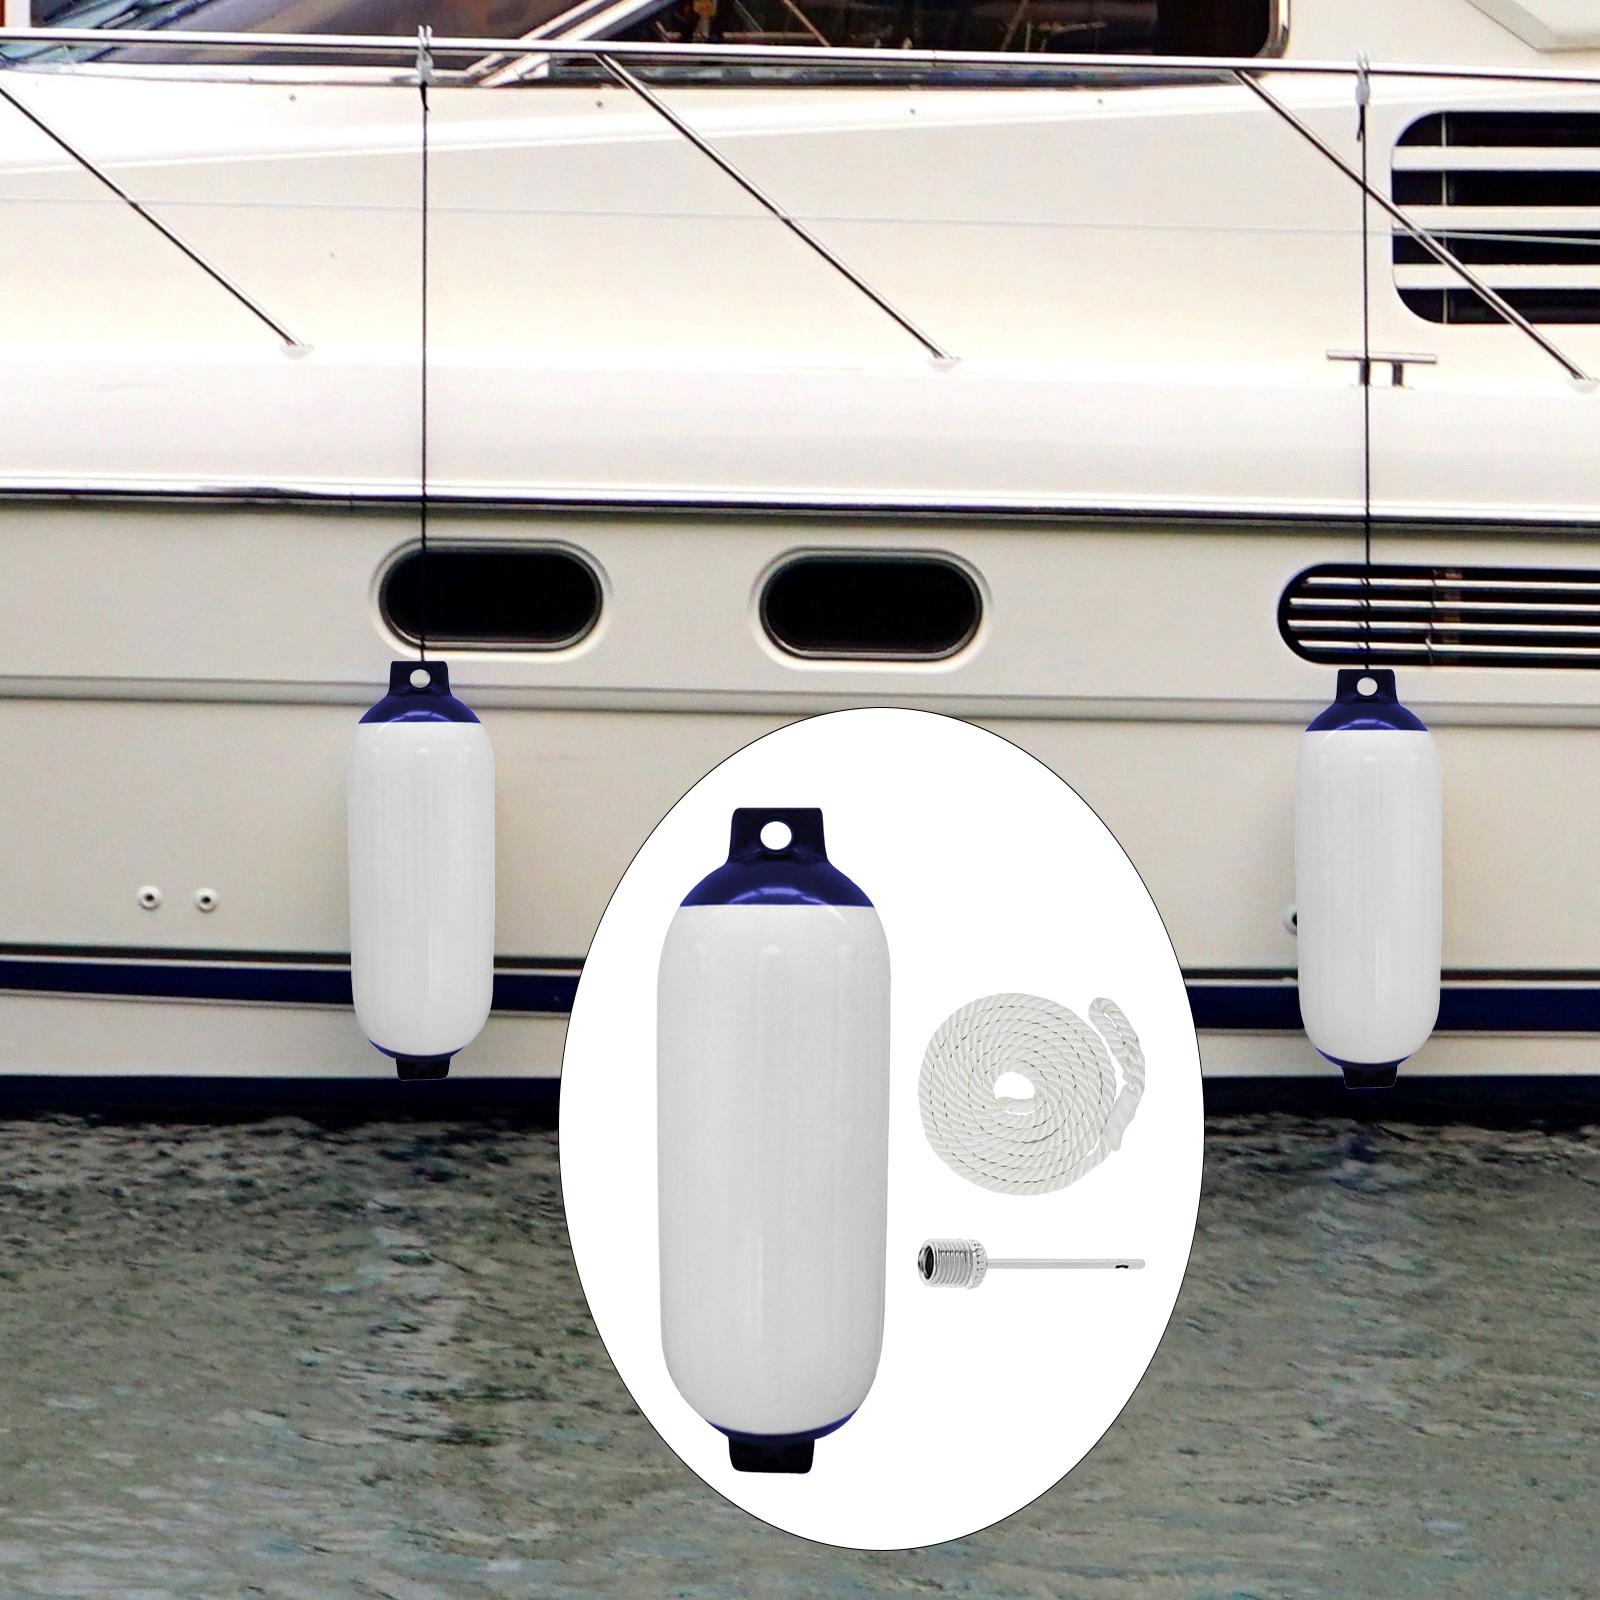 Boat Fender Boat Accessories 4x16inch Boat Bumper Protector Anti Collision for Docking Yacht Sailboats Speedboat Pontoon